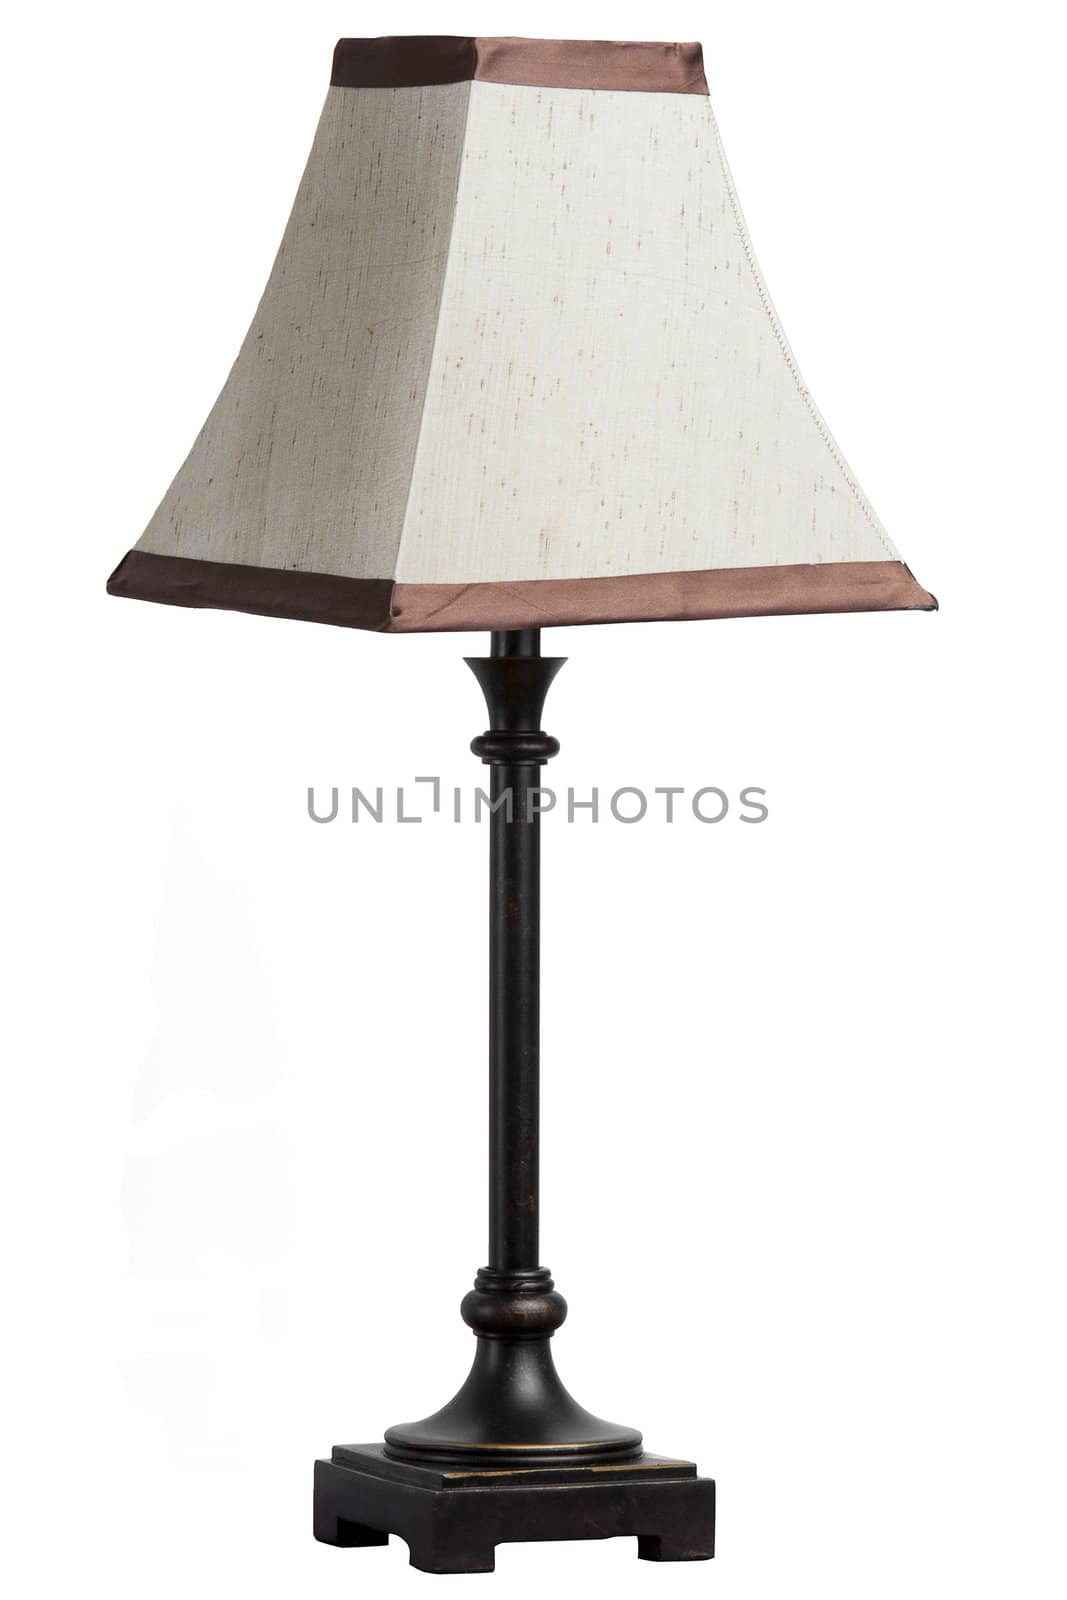 A table lamp with shade isolated on white background